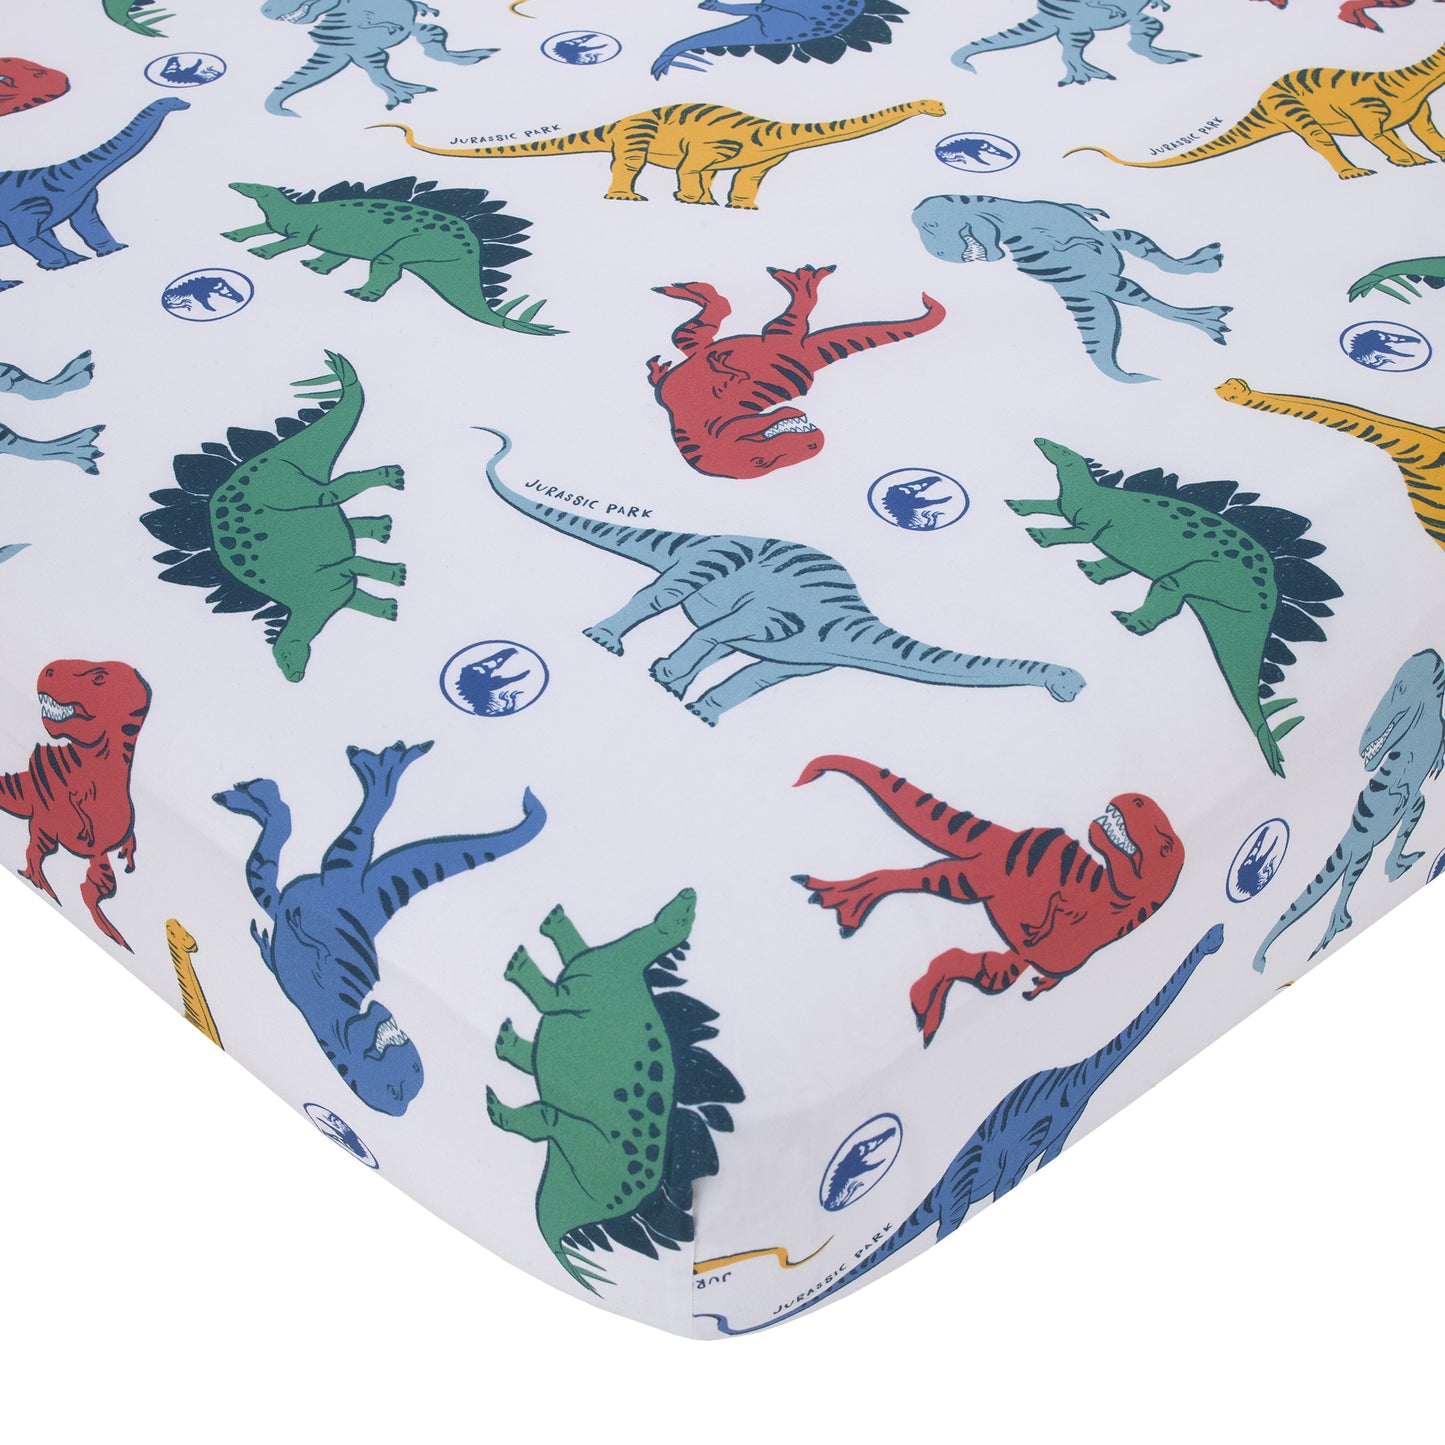 Universal Jurassic World Wild and Free Blue, Green, and Yellow Dinosaur 4 Piece Toddler Bed Set - Comforter, Fitted Bottom Sheet, Flat Top Sheet, Reversible Pillowcase